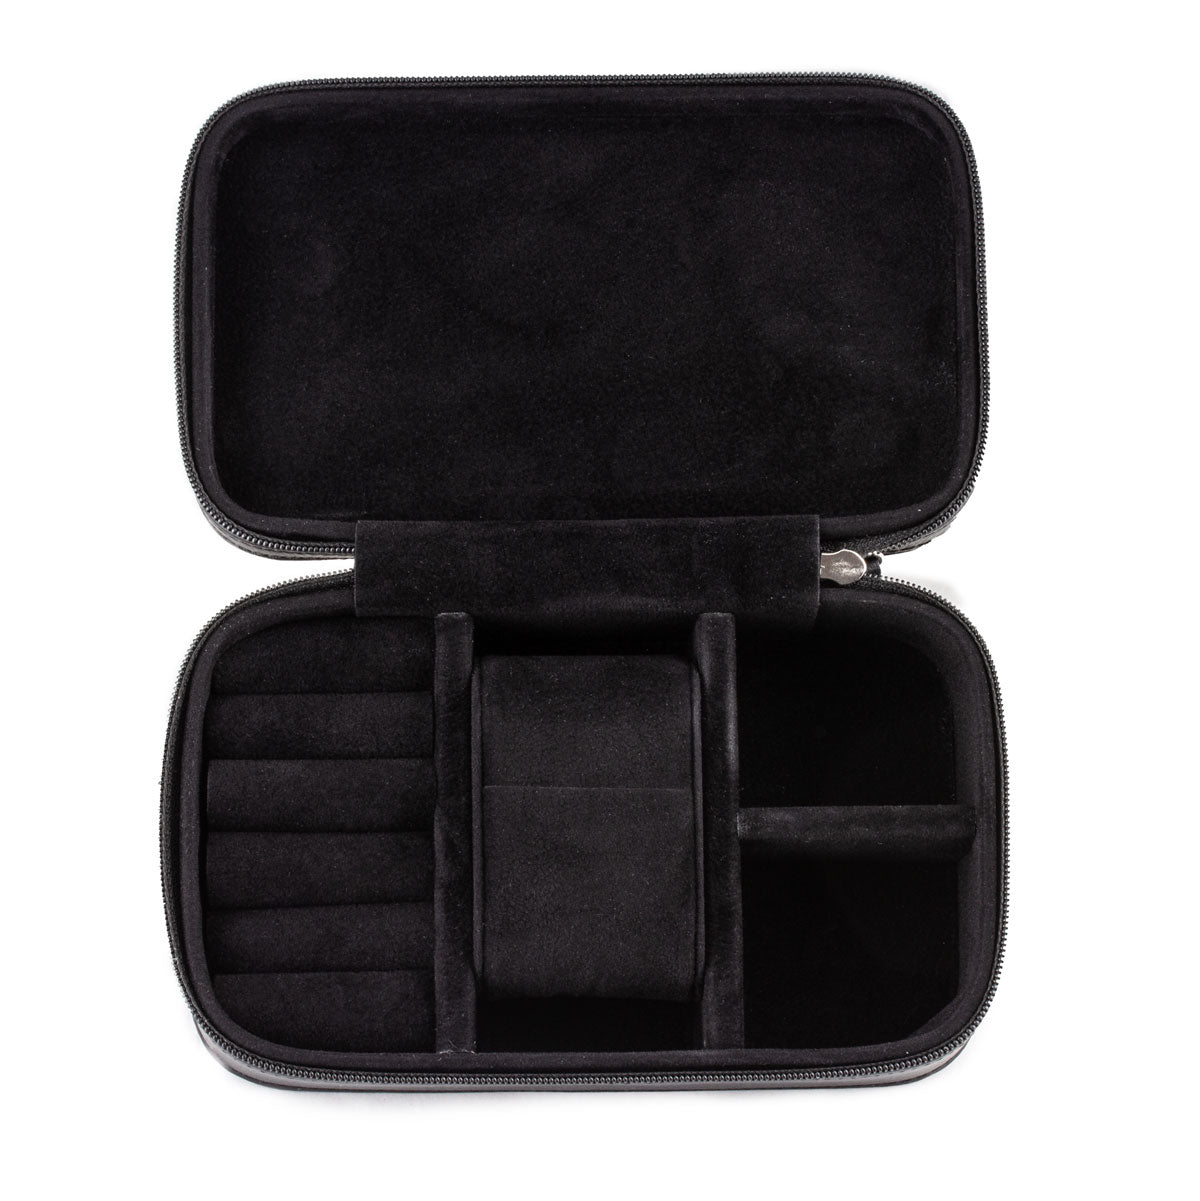 Watch and jewelry box - Travel case for 1 watches - Beige / Black – ABP  Concept